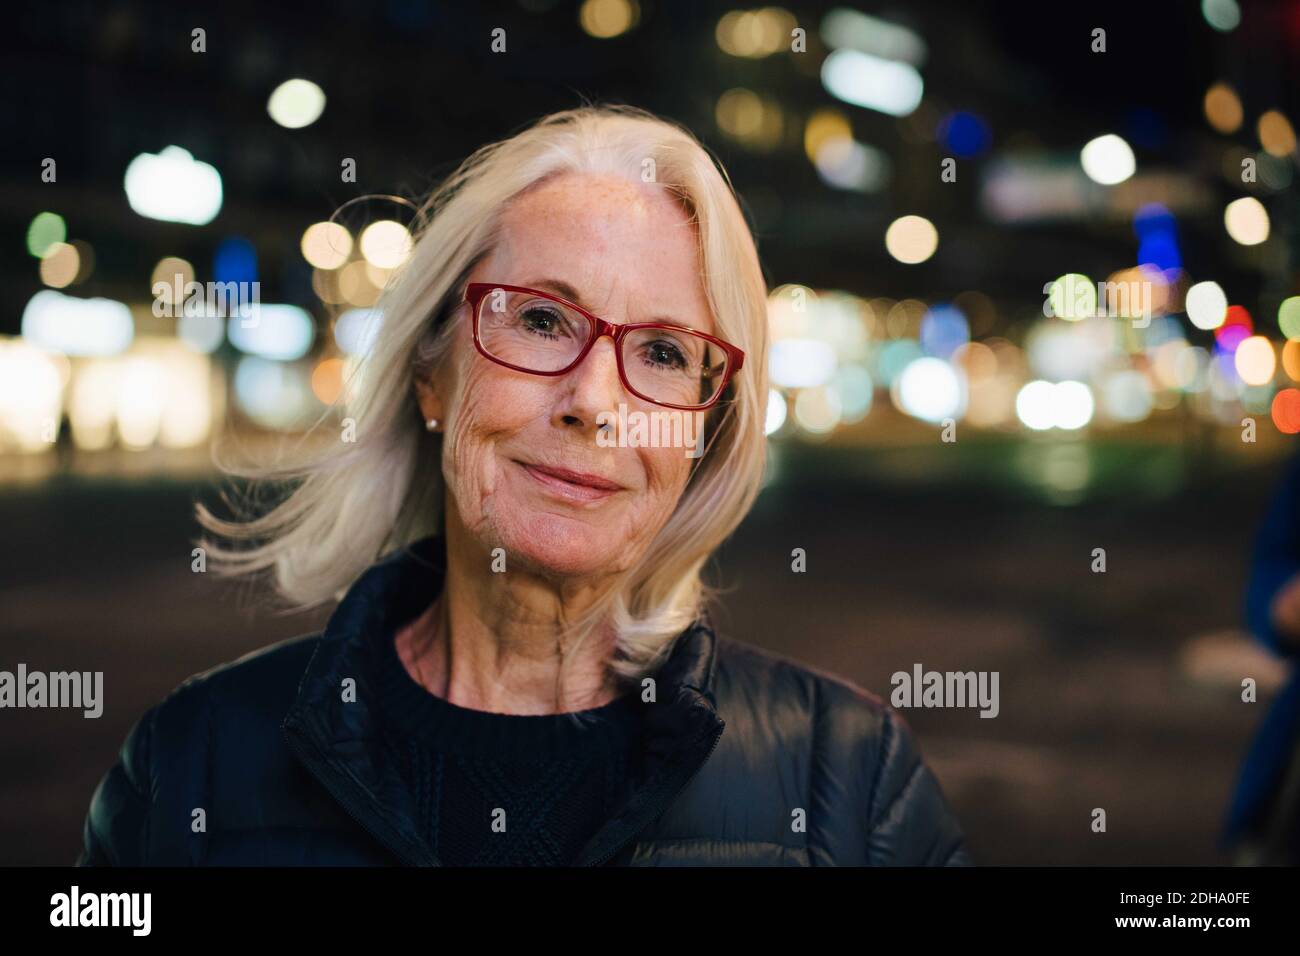 Portrait of wrinkled smiling woman standing in illuminated city at night Stock Photo